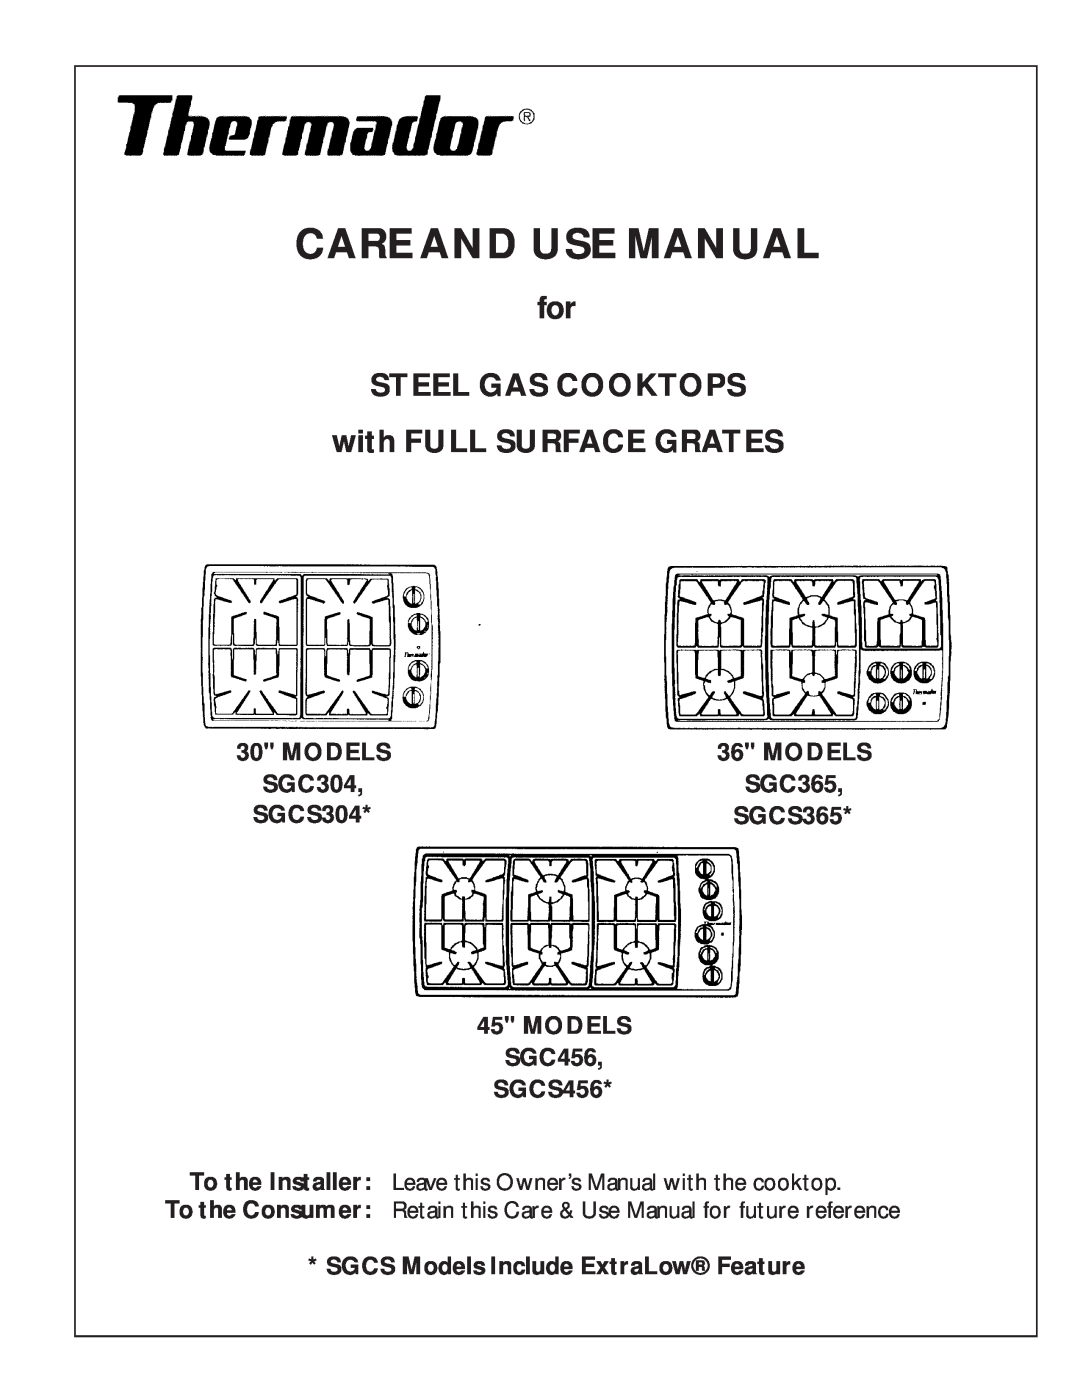 Thermador SGC456 owner manual Care And Use Manual, for STEEL GAS COOKTOPS with FULL SURFACE GRATES, Models, SGC304, SGC365 